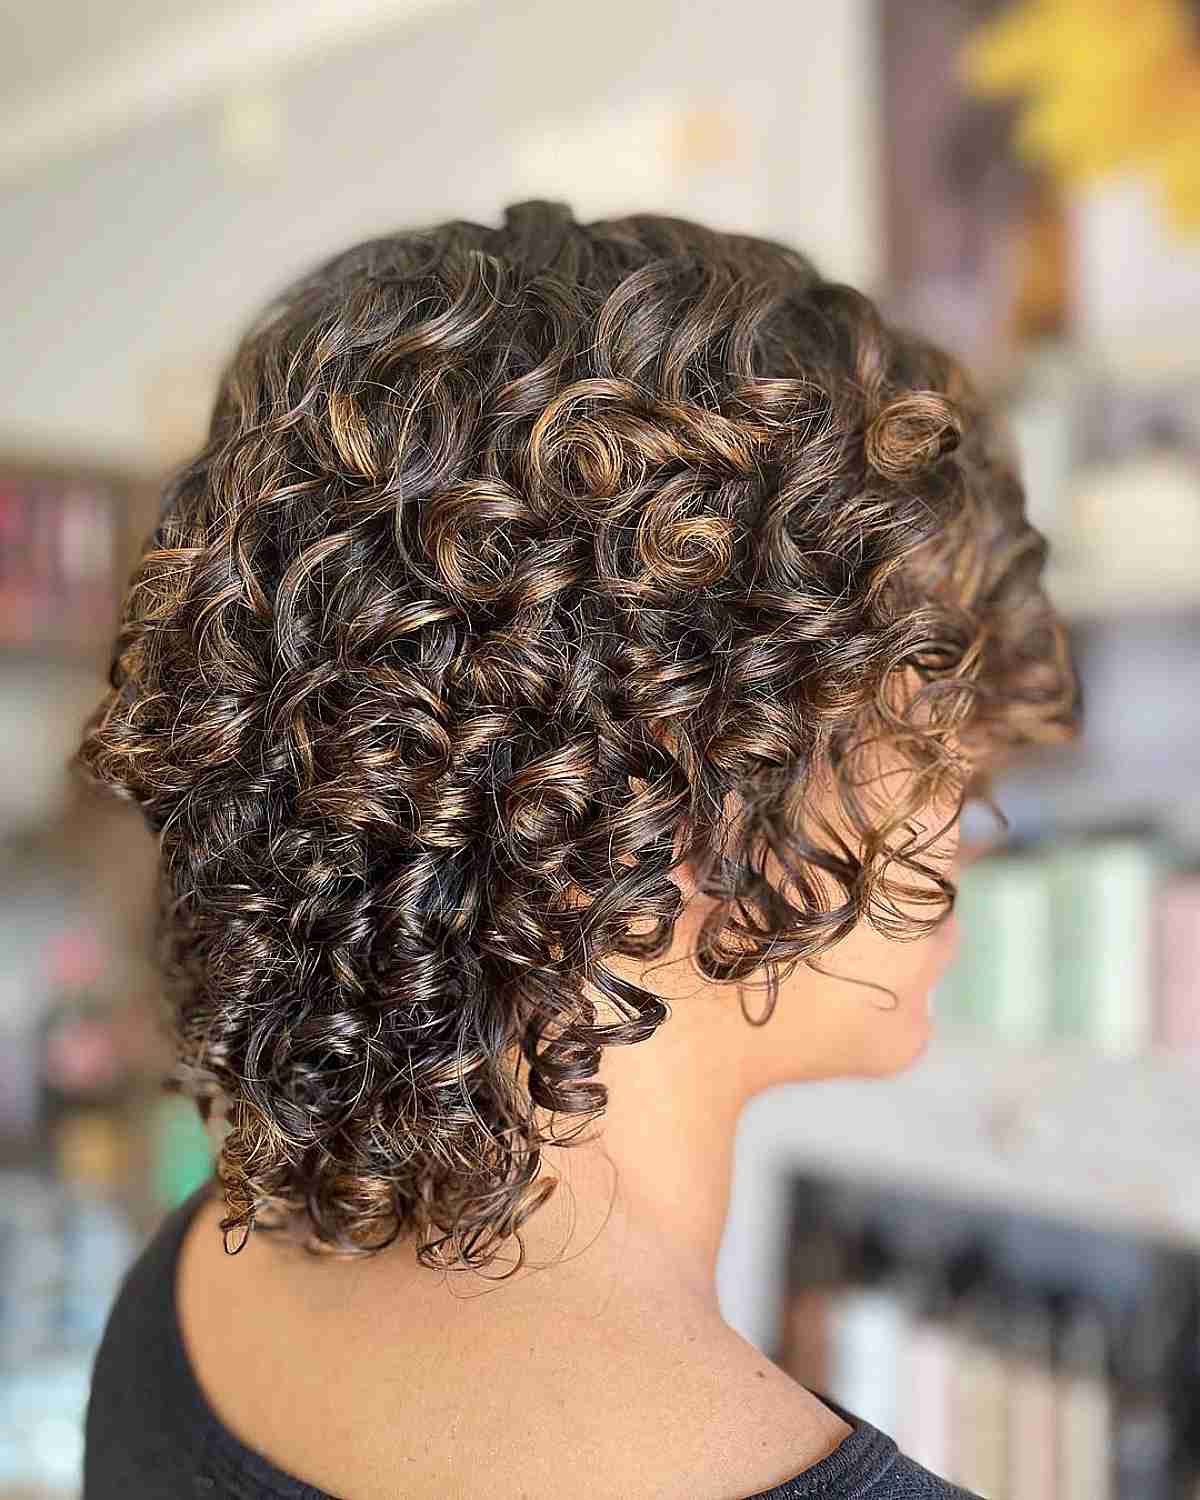 Short Layered Curly Hair with Subtle Pops of Honey Balayage